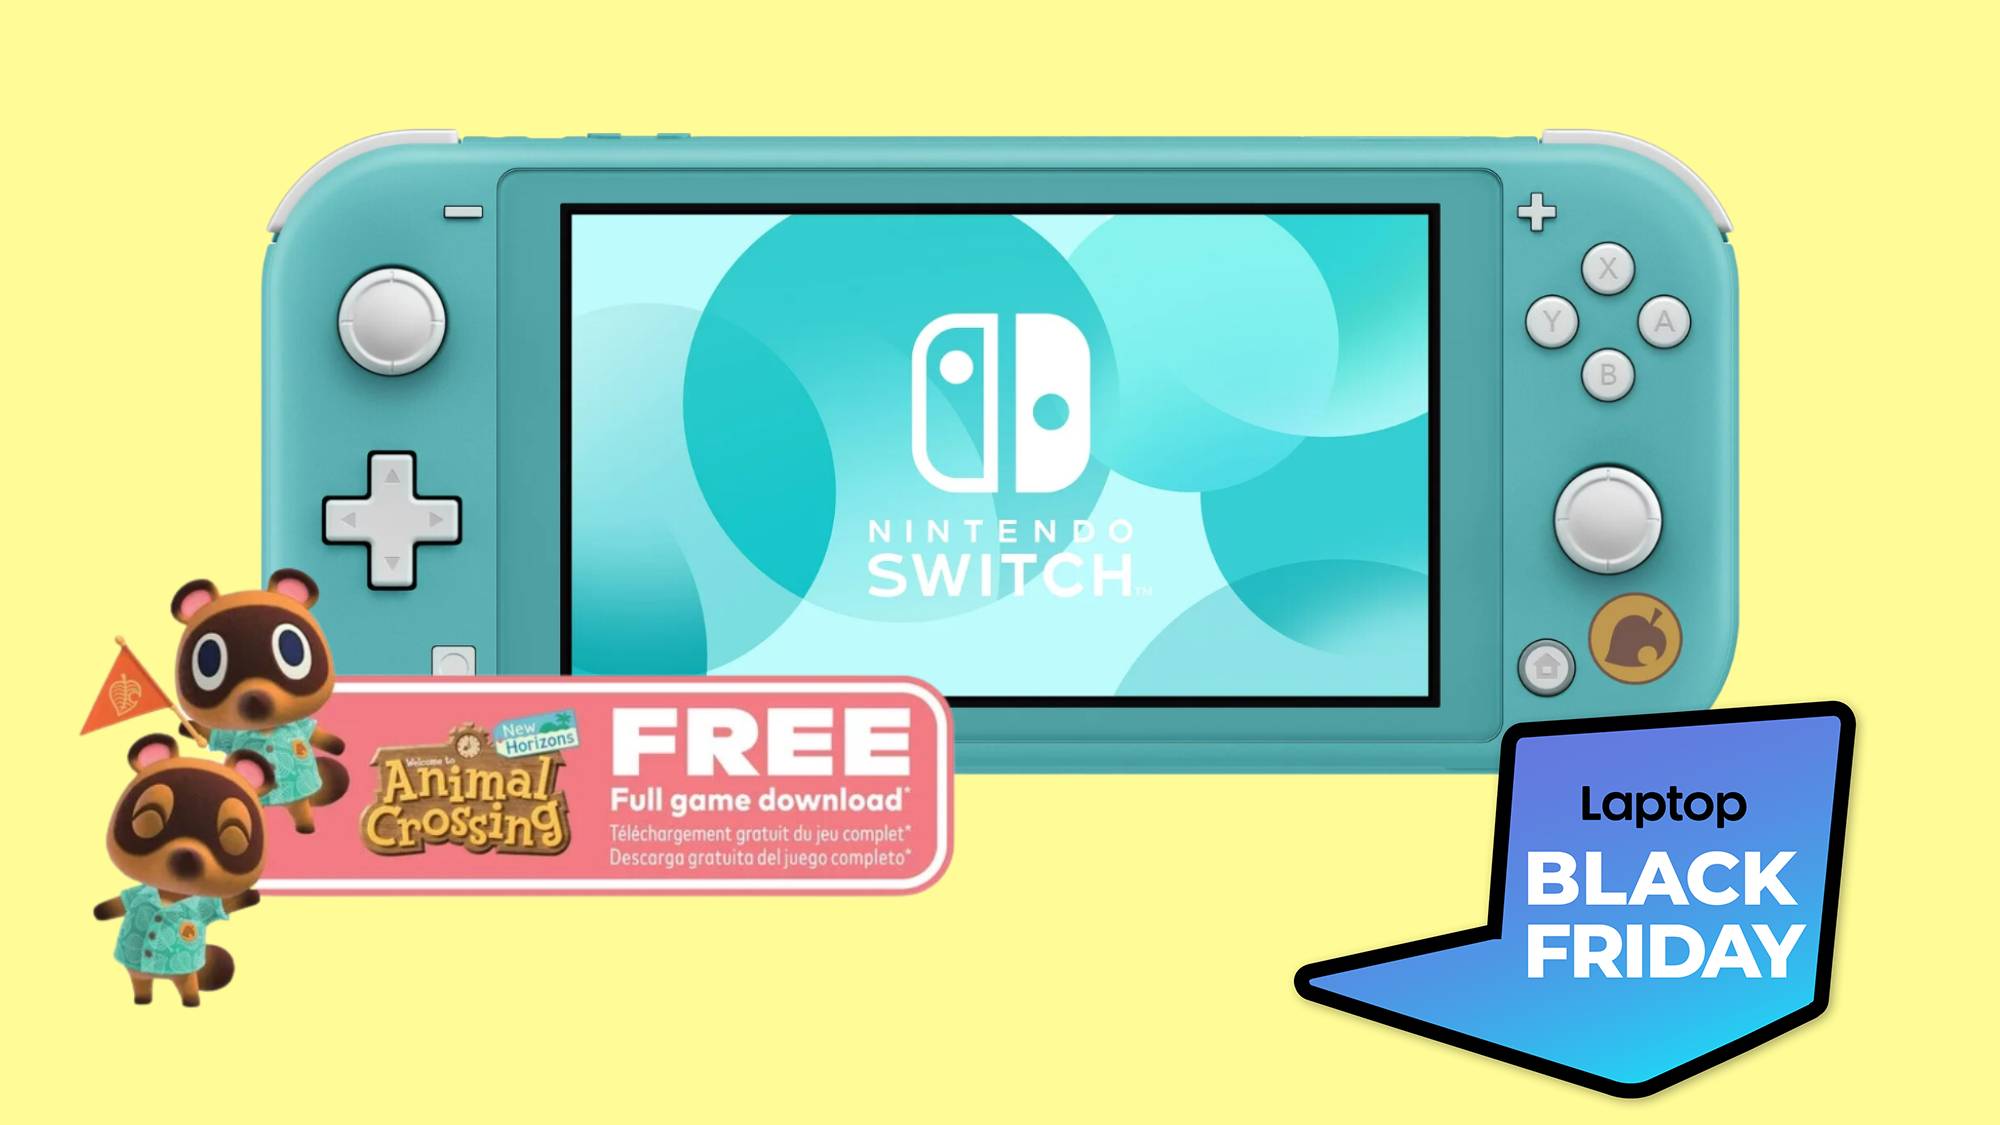 Nintendo Switch Black Friday deals — the 9 best deals on Switch